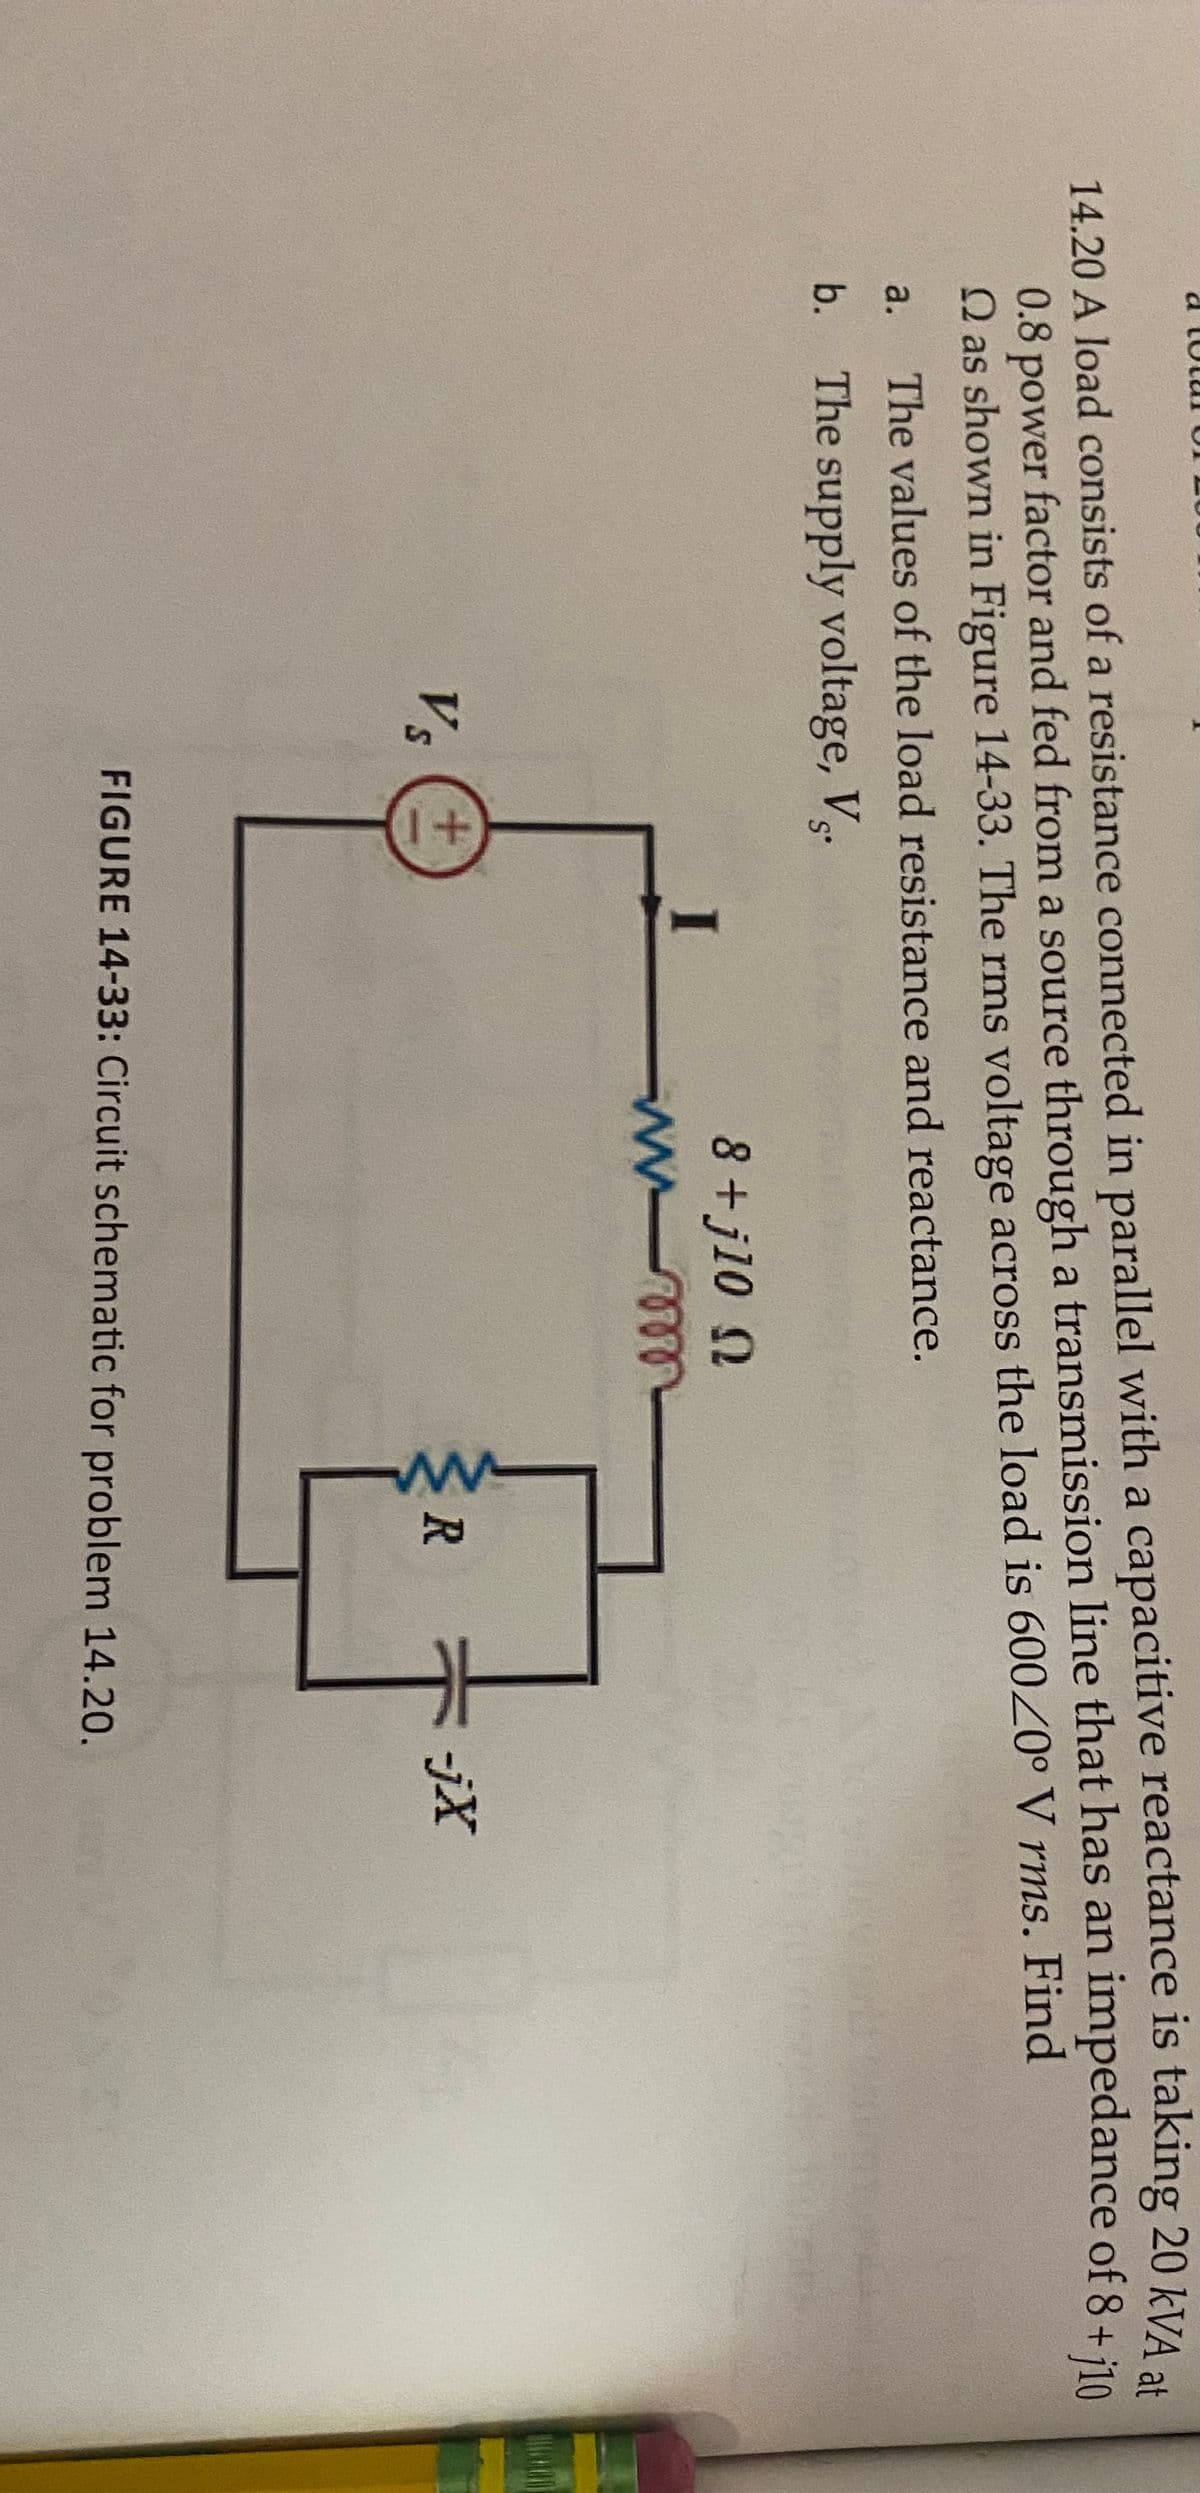 14.20 A load consists of a resistance connected in parallel with a capacitive reactance is taking 20 kVA a4
0.8 power factor and fed from a source through a transmission line that has an
Q as shown in Figure 14-33. The rms voltage across the load is 600°V rms. Find
impedance of 8 + j10
a.
The values of the load resistance and reactance.
b. The supply voltage, V.
8+j10 N
Vs
-jX
FIGURE 14-33: Circuit schematic for problem 14.20.
